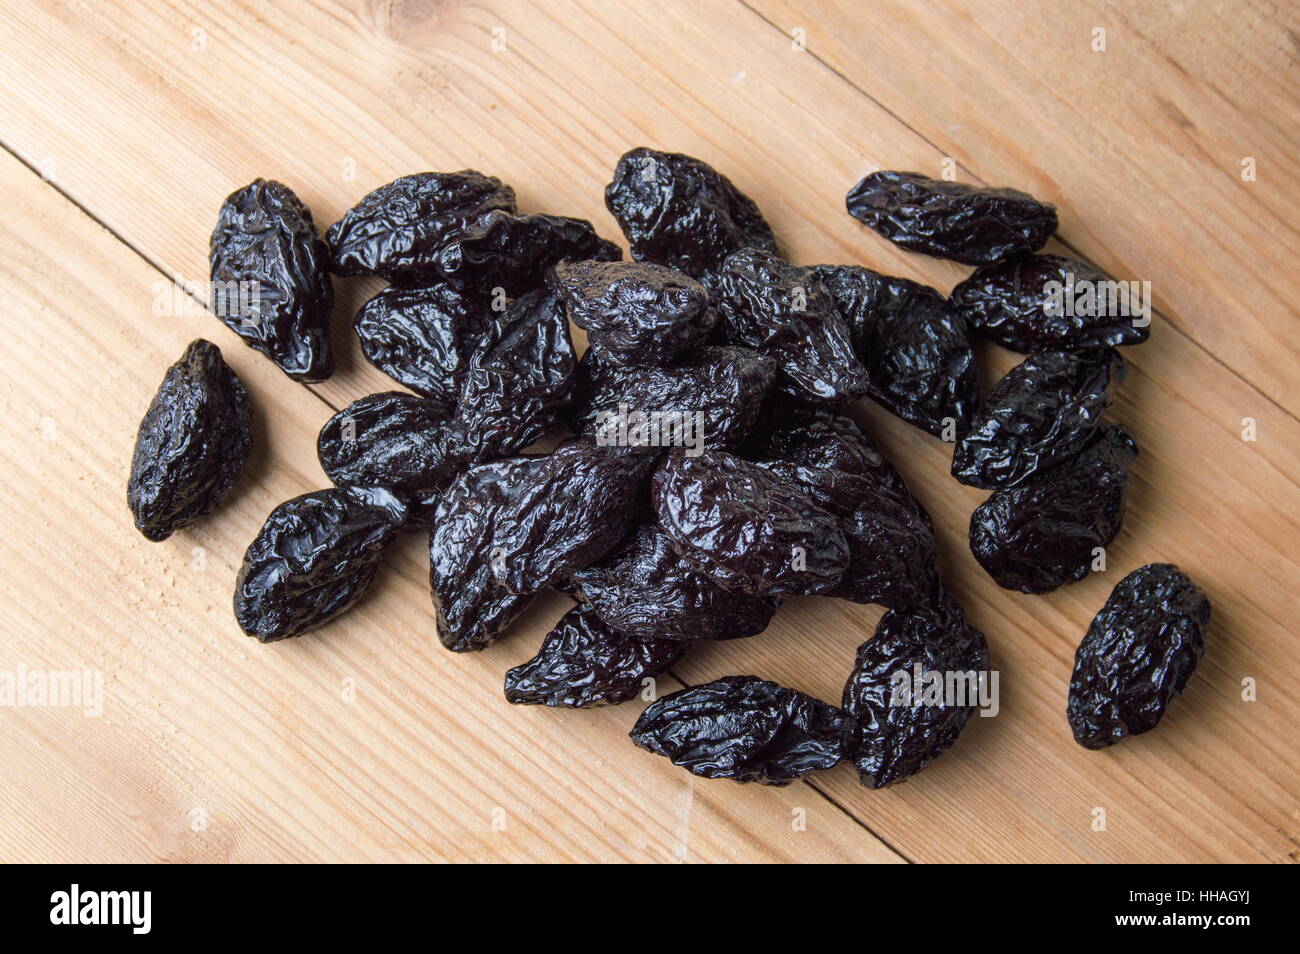 Bunch of dried plums on wooden table Stock Photo